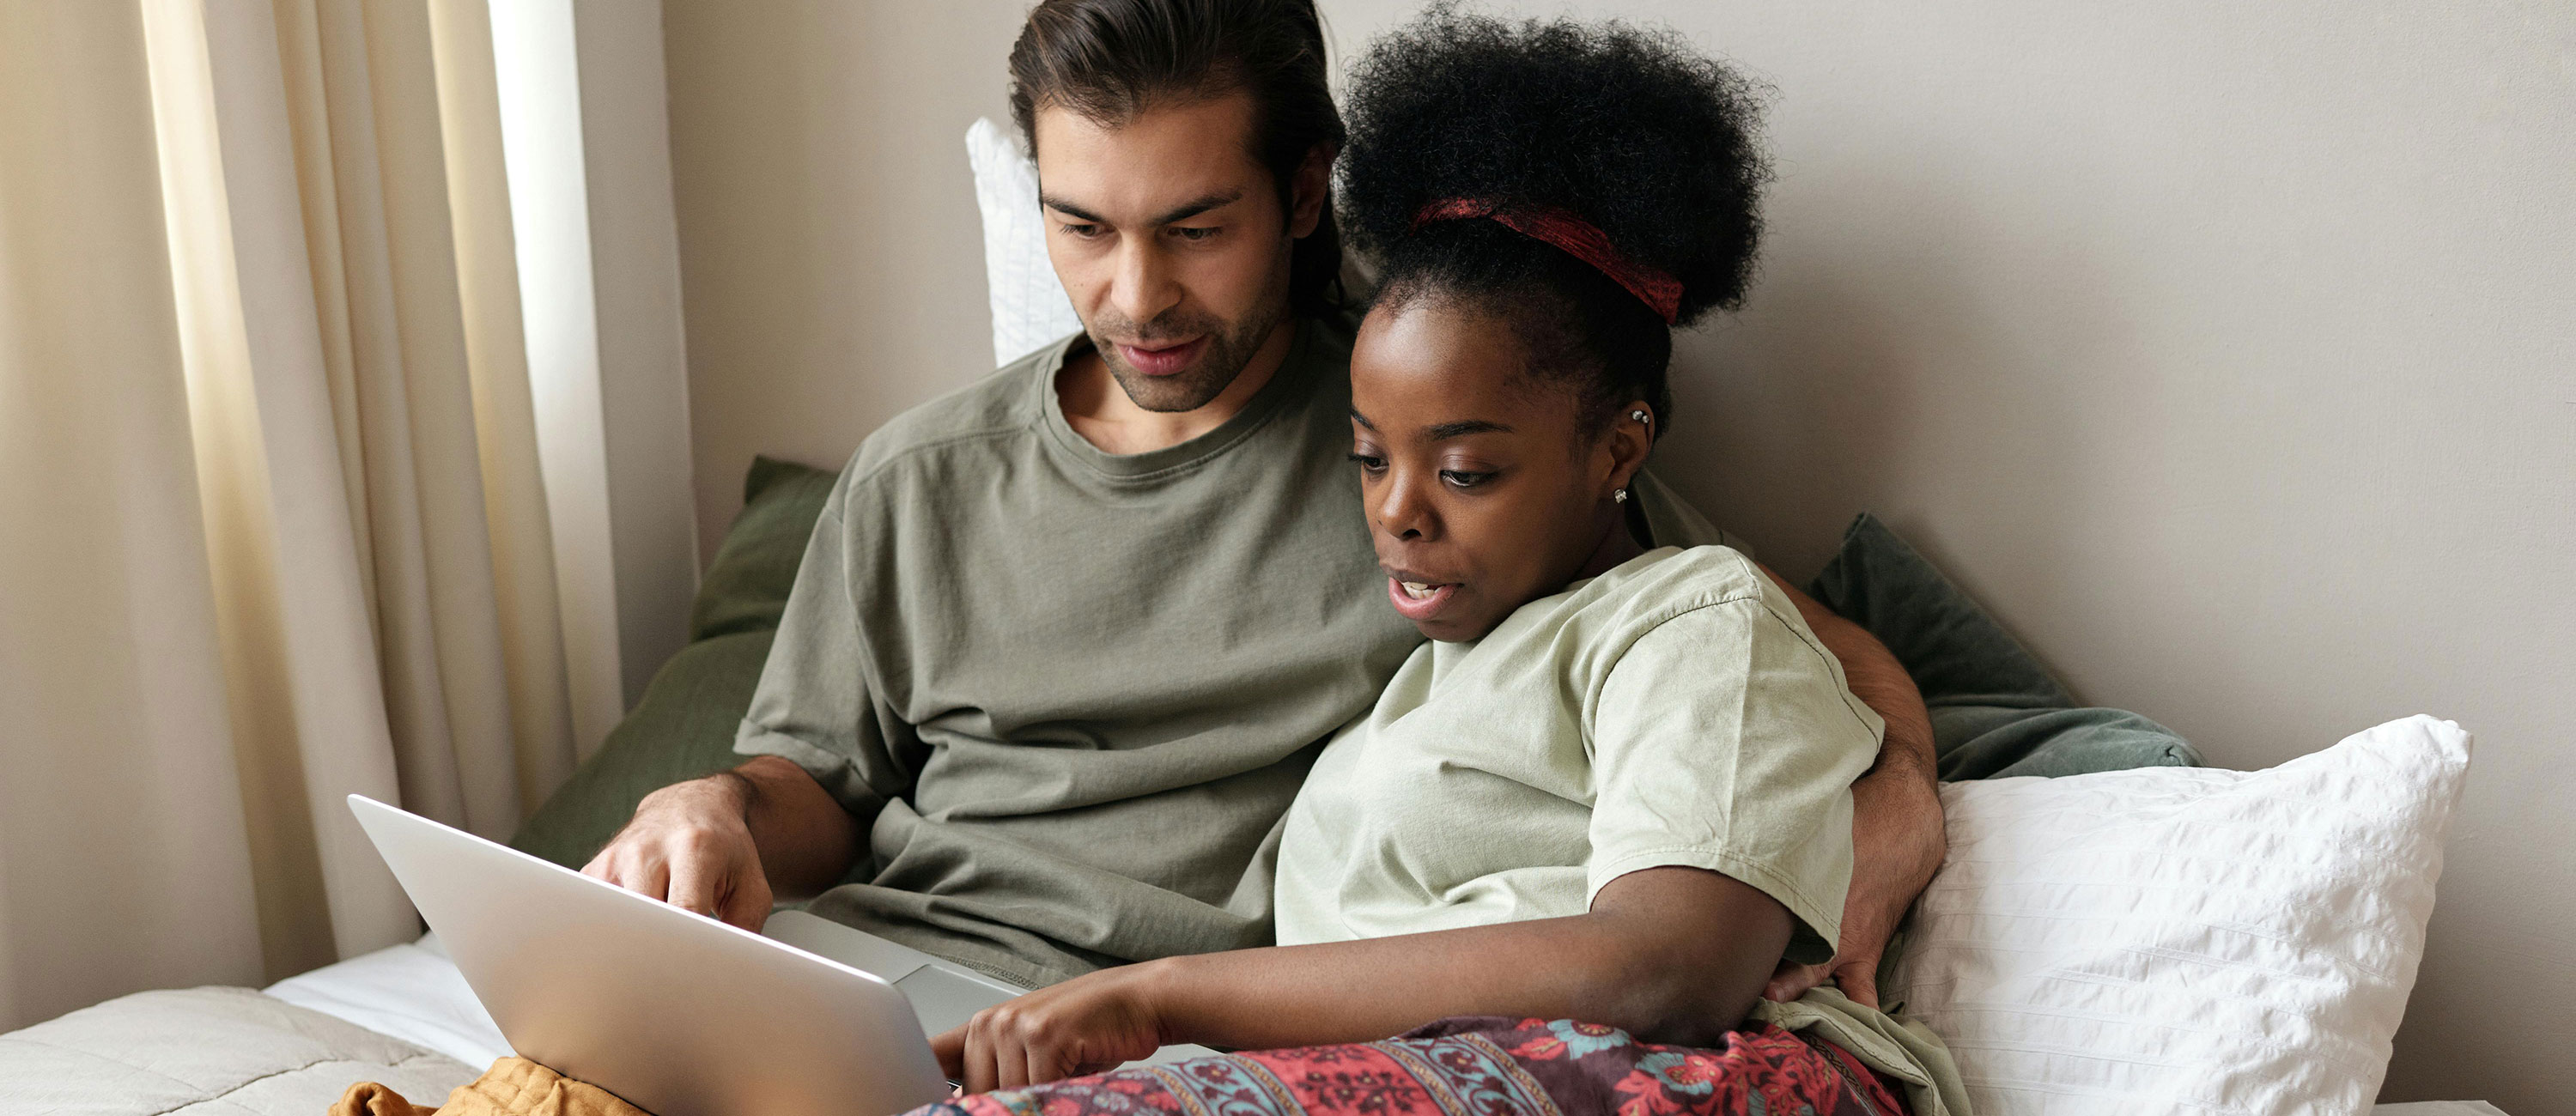 two people sit on a bed looking at a laptop